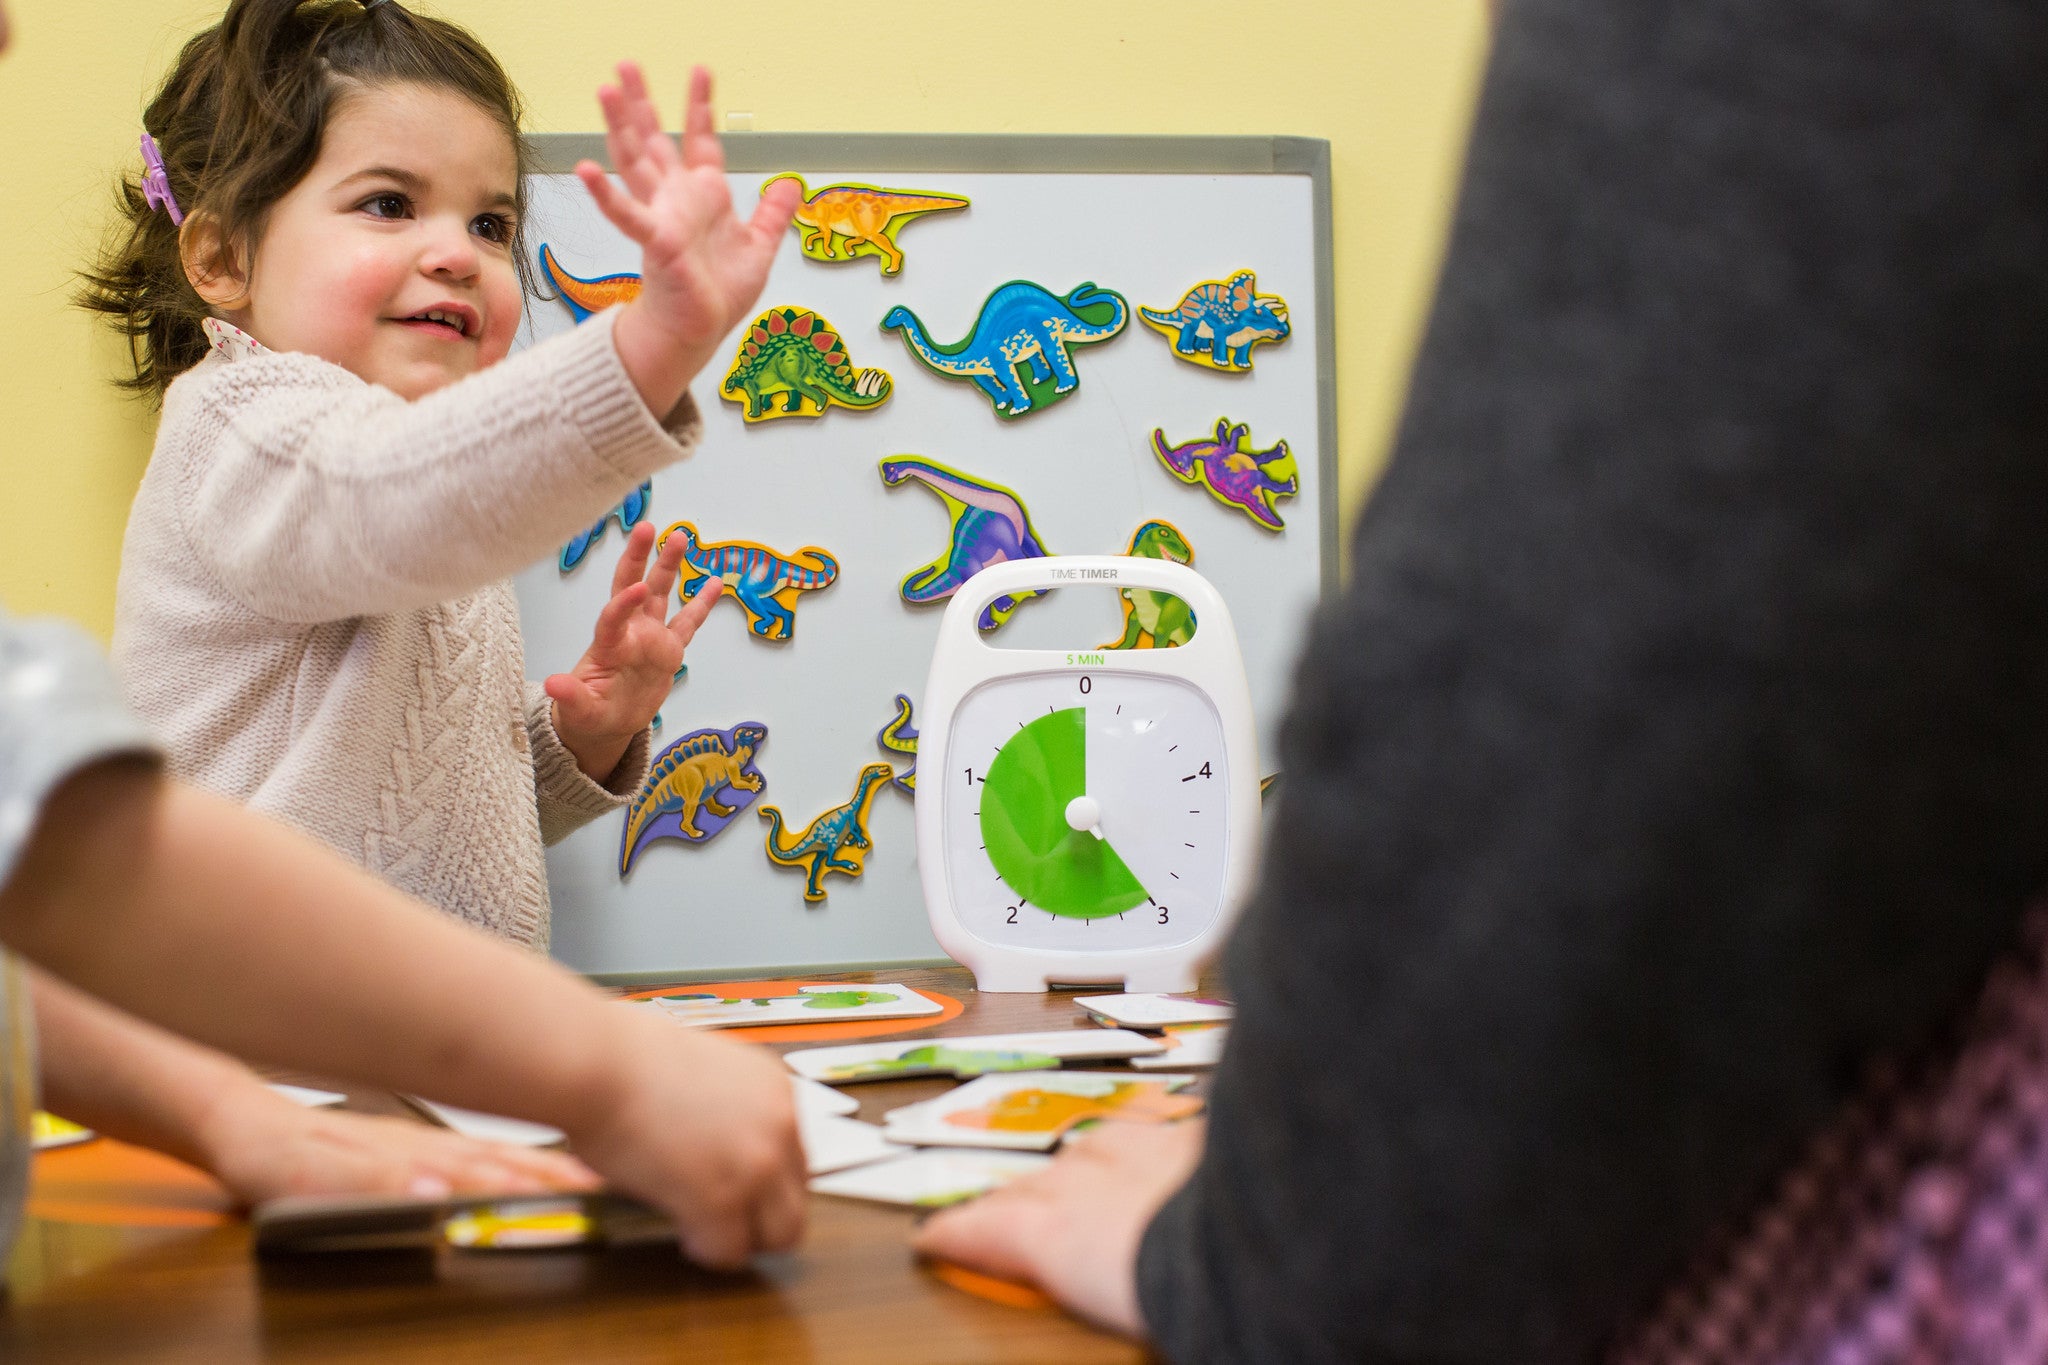 A child with light skin tone and short brown hair is standing in front of a dry erase board covered in magnetic dinosaurs. The child appears to be participating in a group activity. The Time Timer is set at 3 minutes and standing in front of the dry erase board.